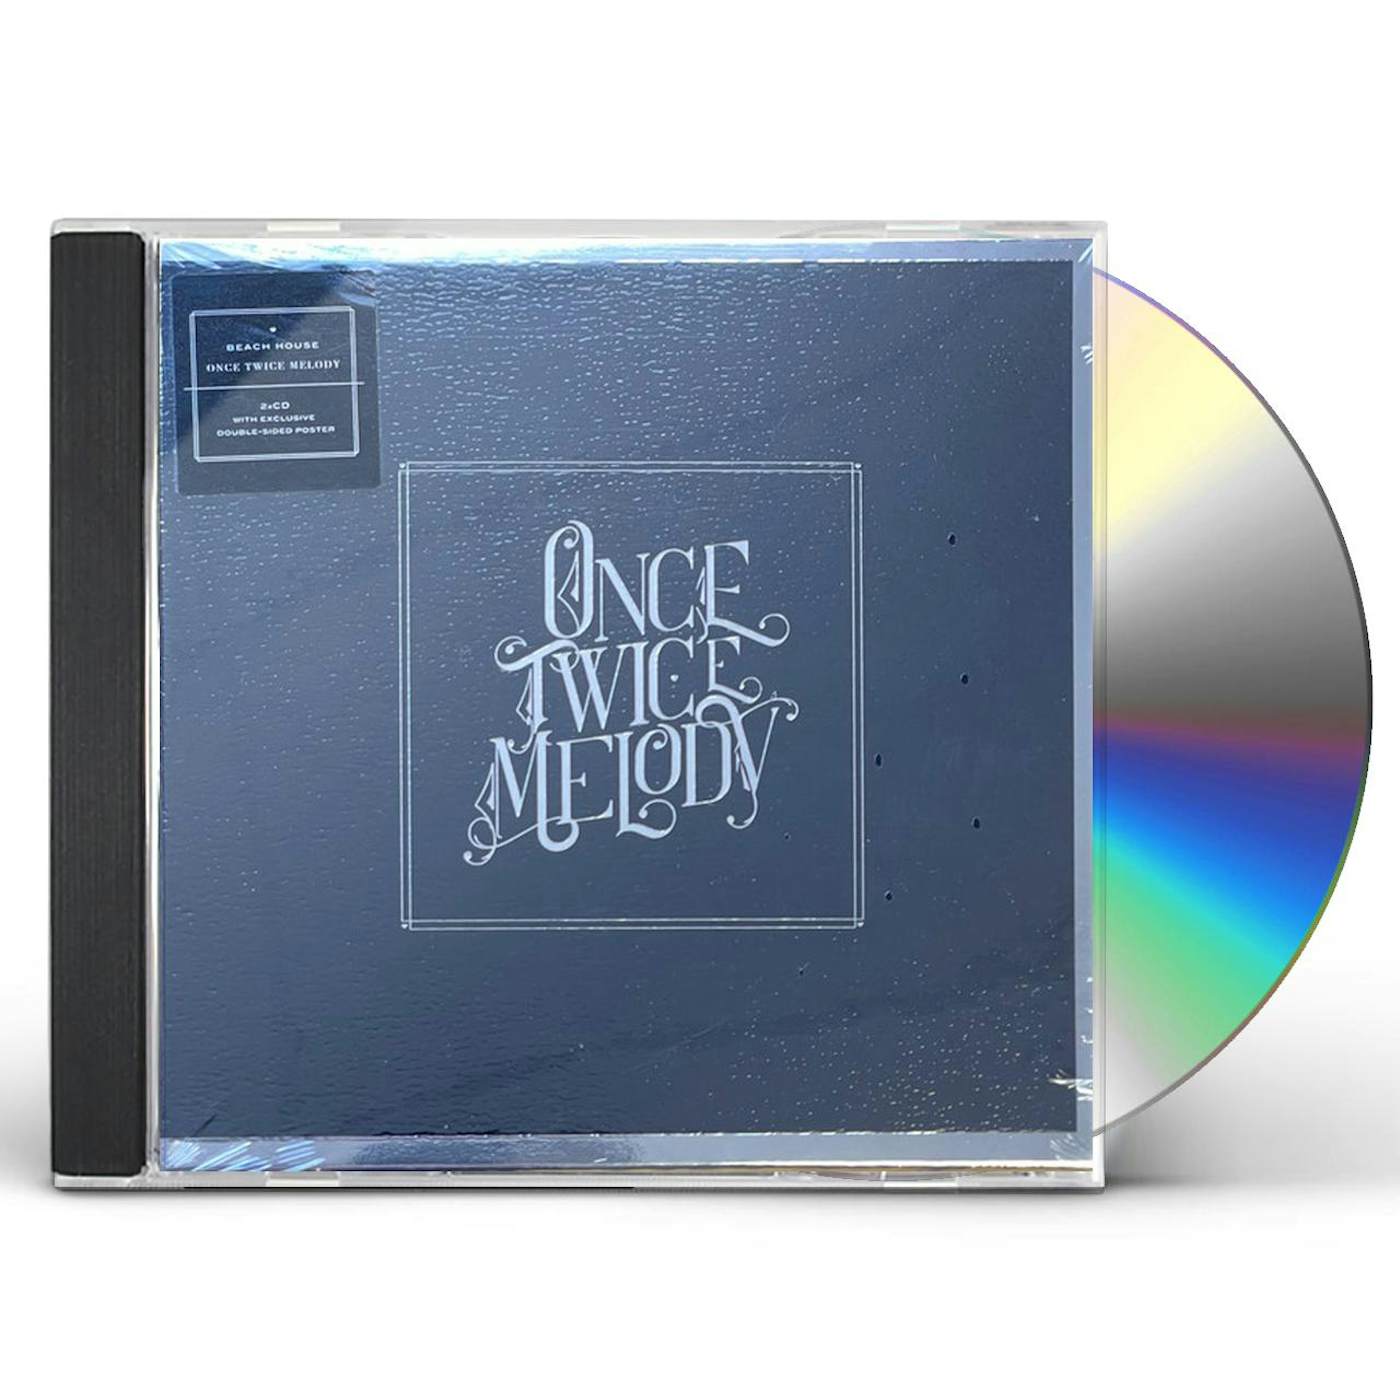 Once Twice Melody CD – BEACH HOUSE